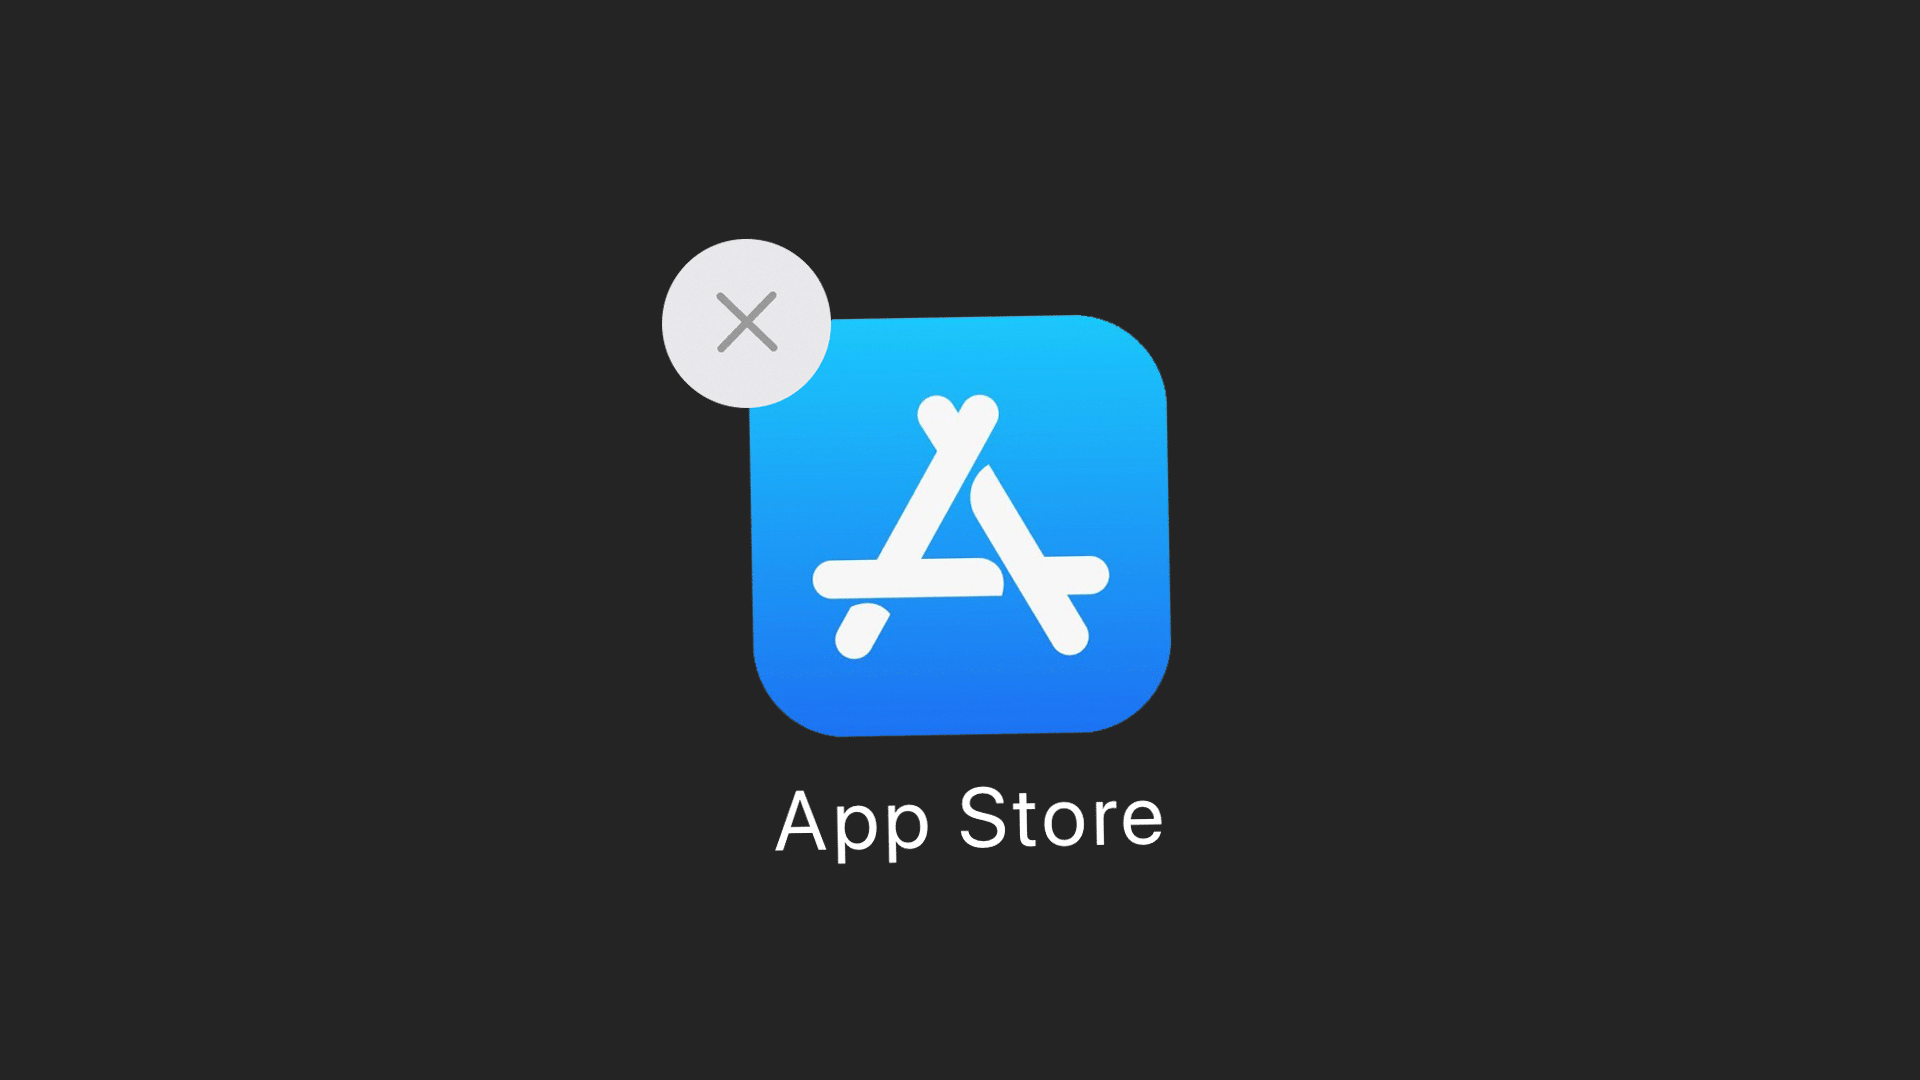 Illustration of an App Store App icon about to be deleted